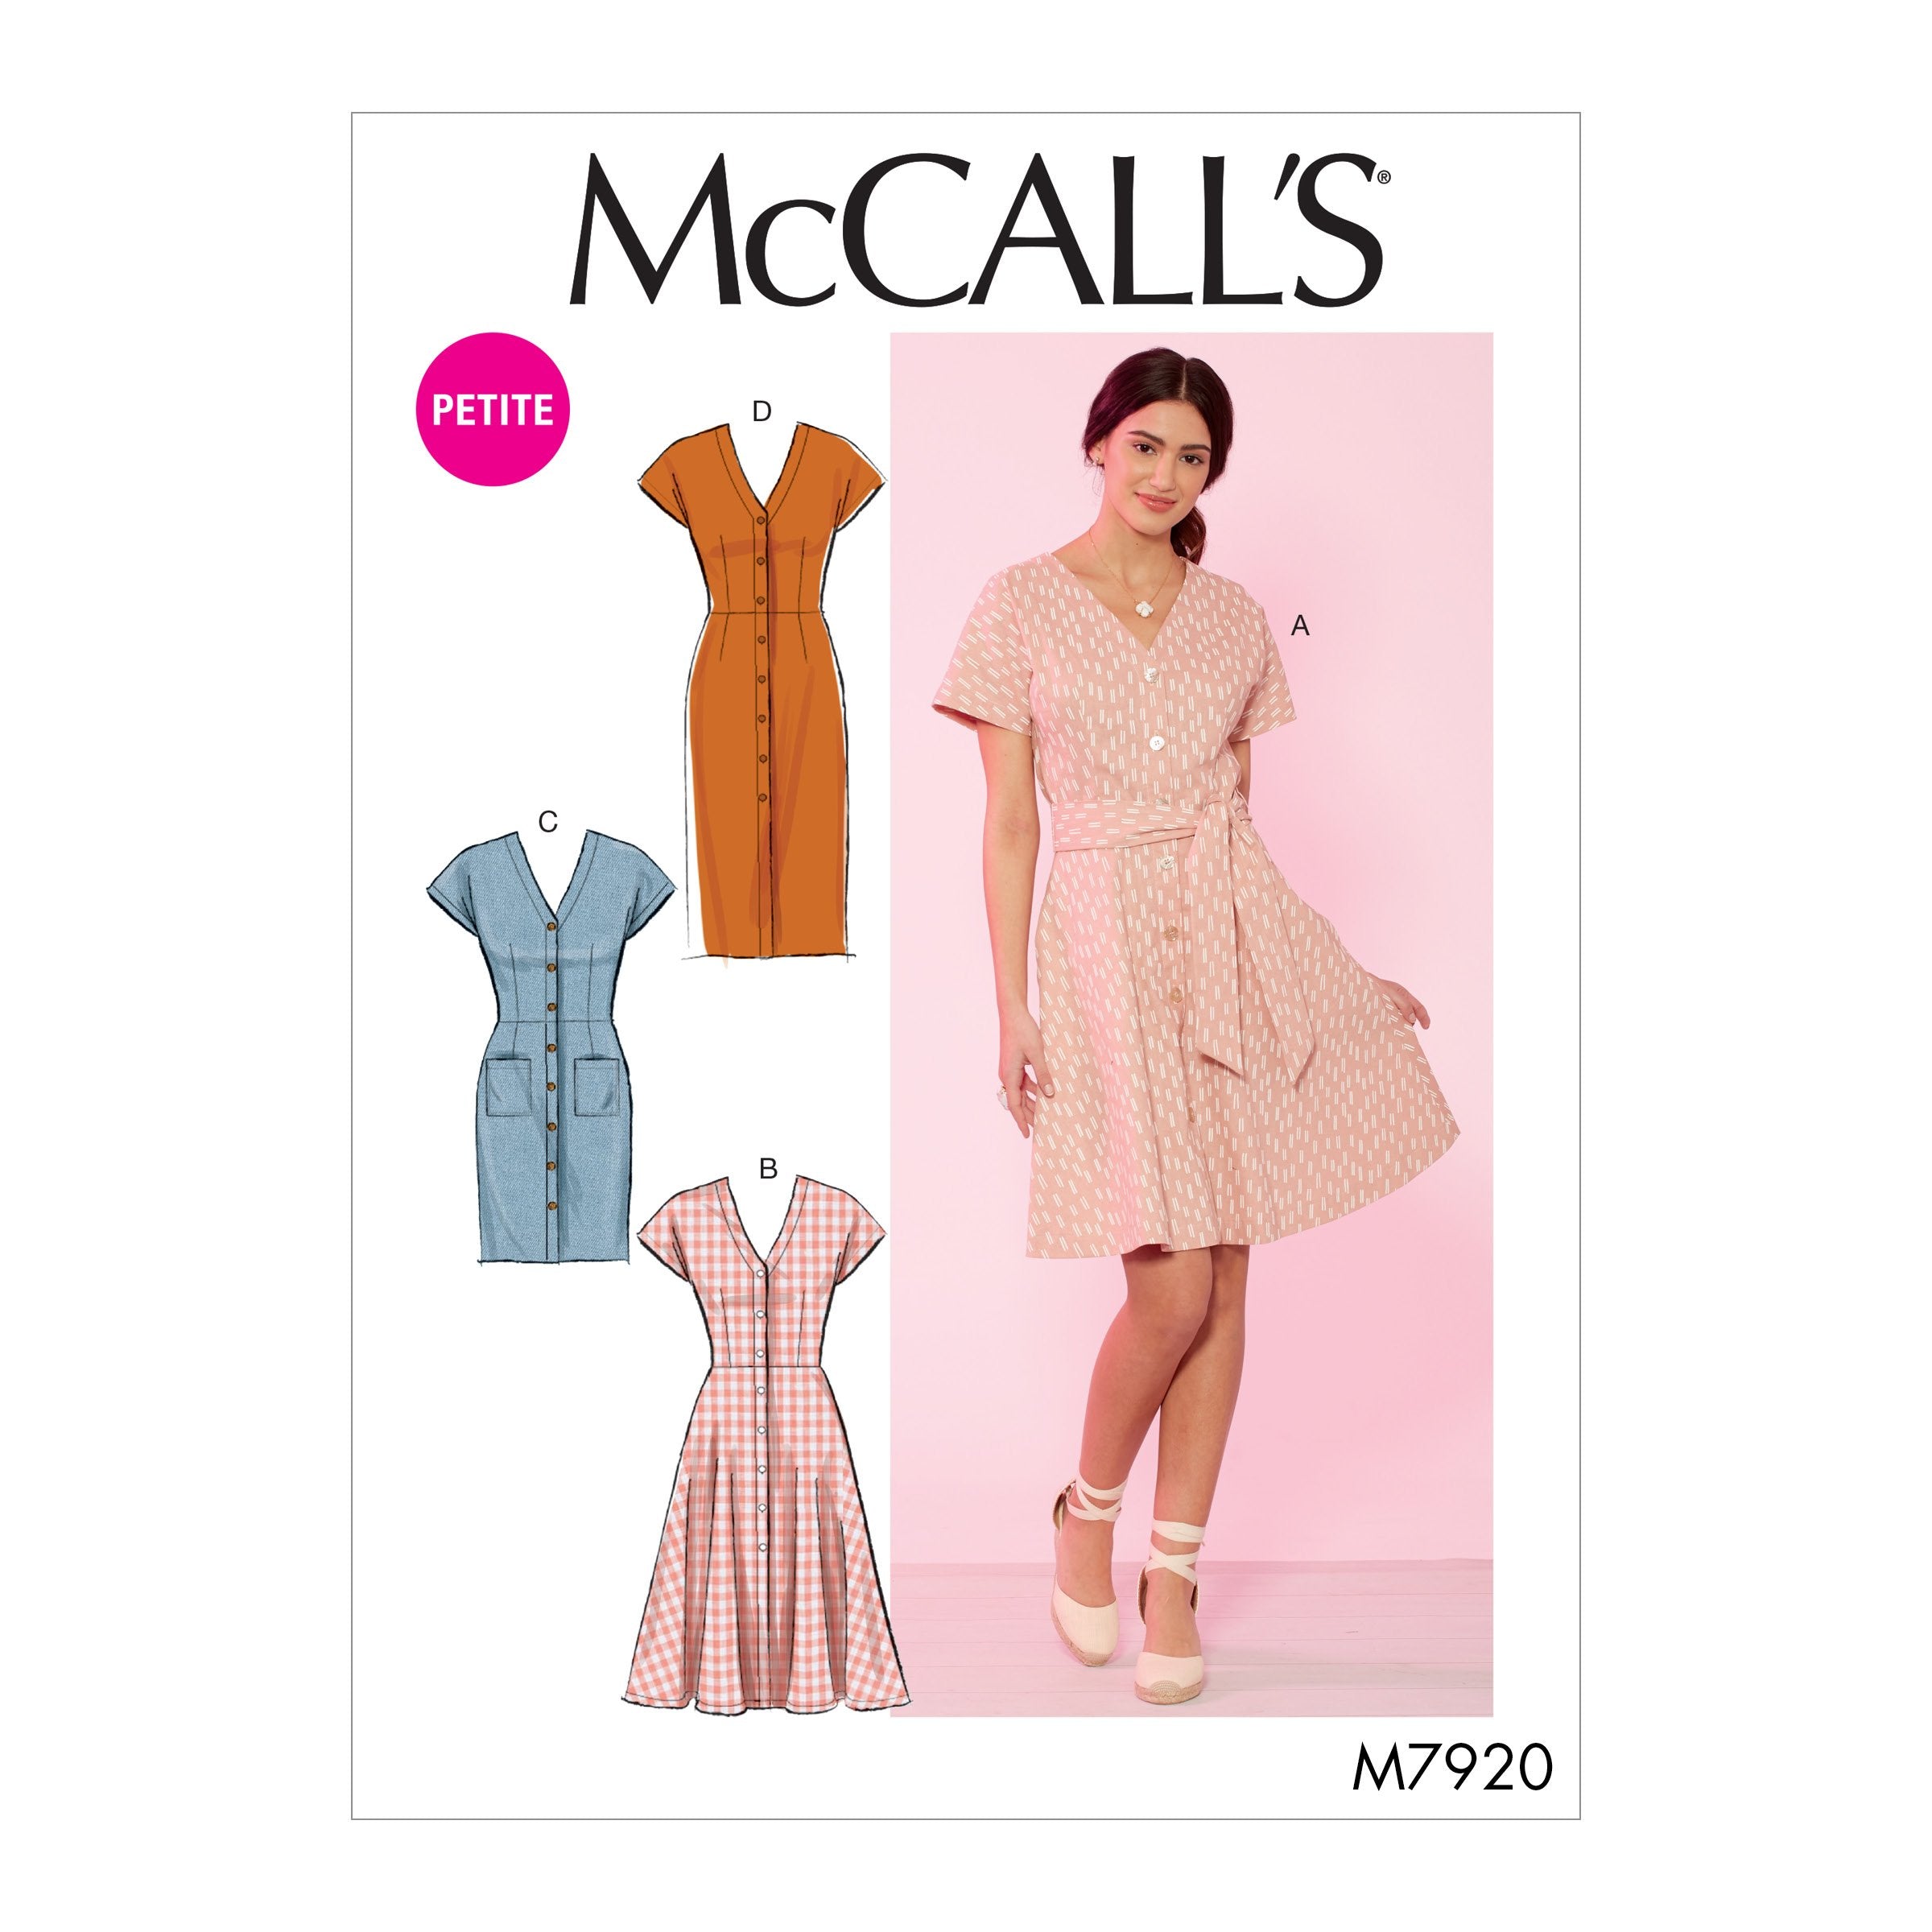 McCall's 7920 Misses'/Miss Petite Dresses and Belt from Jaycotts Sewing Supplies